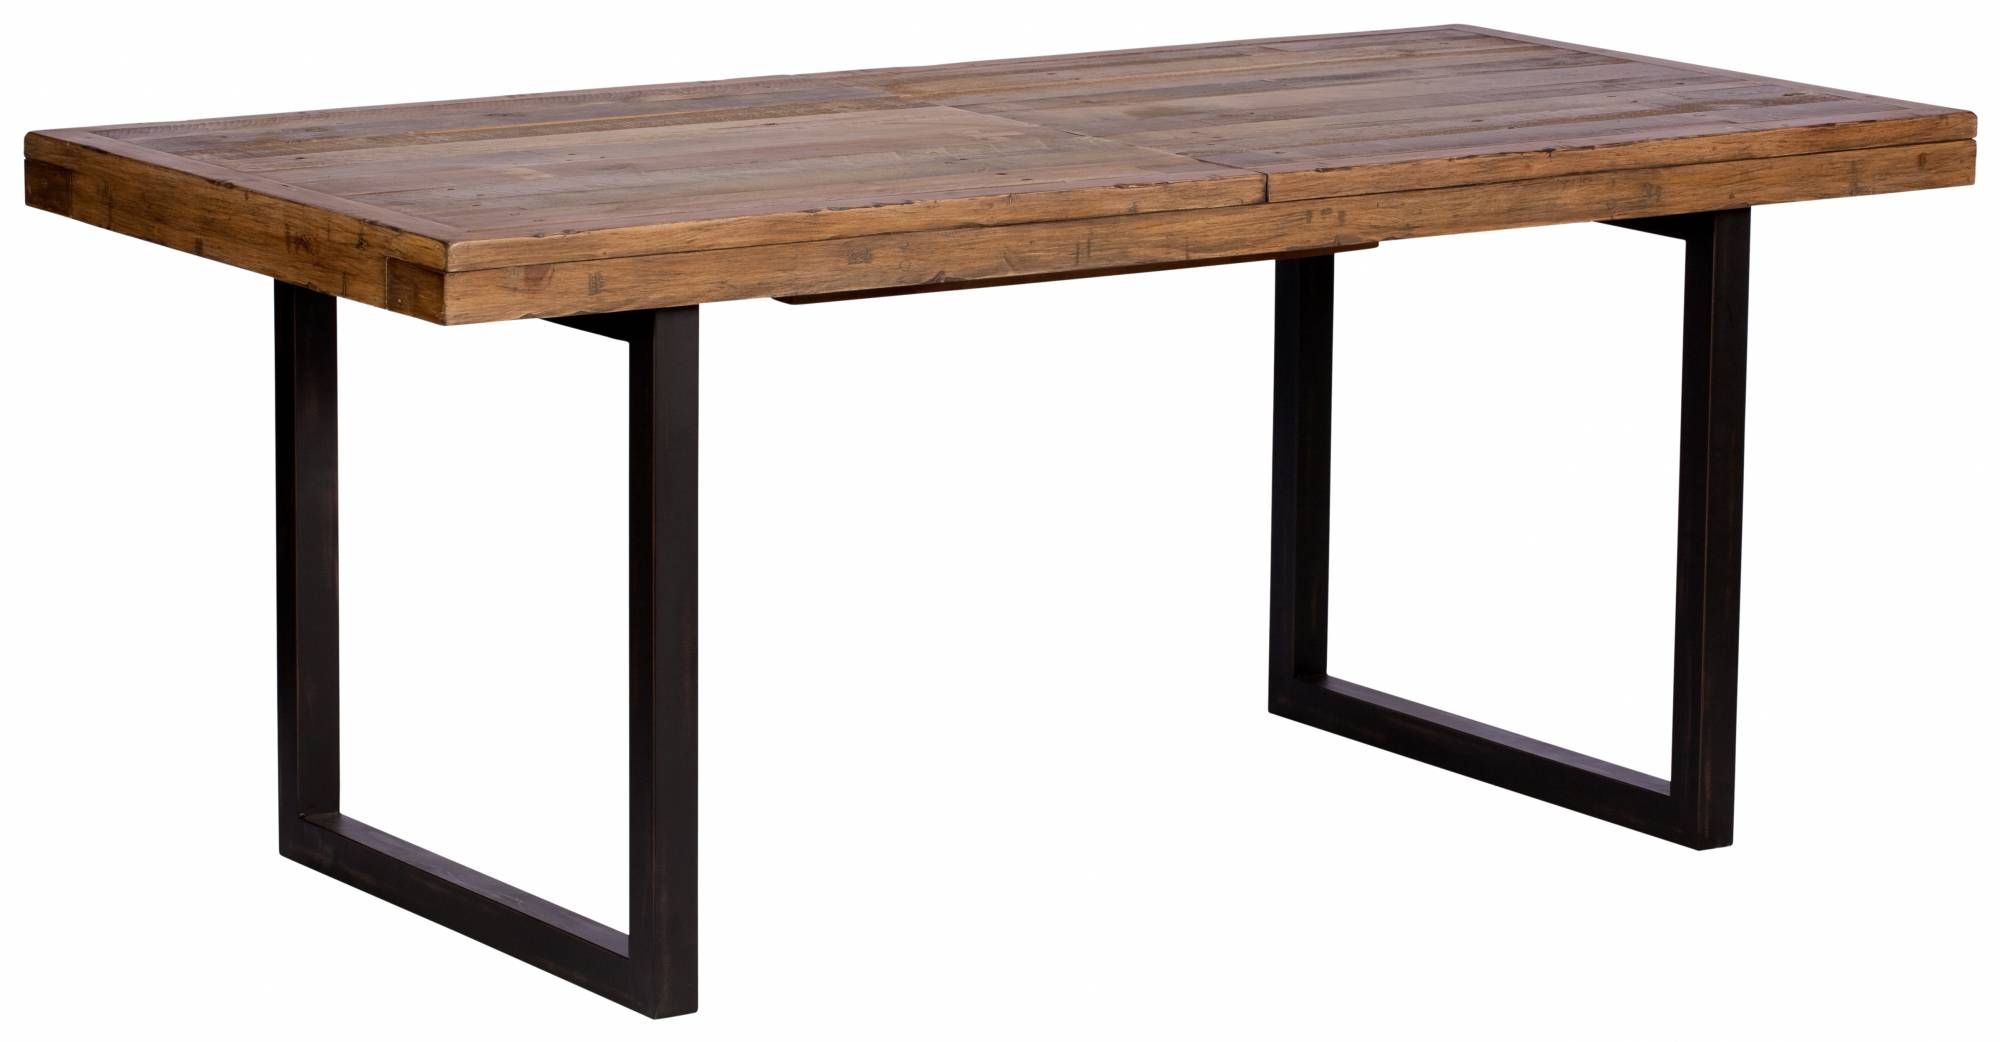 Latest Hardware – New 140cm Extending Dining Table In Small Rustic Look Dining Tables (View 18 of 25)